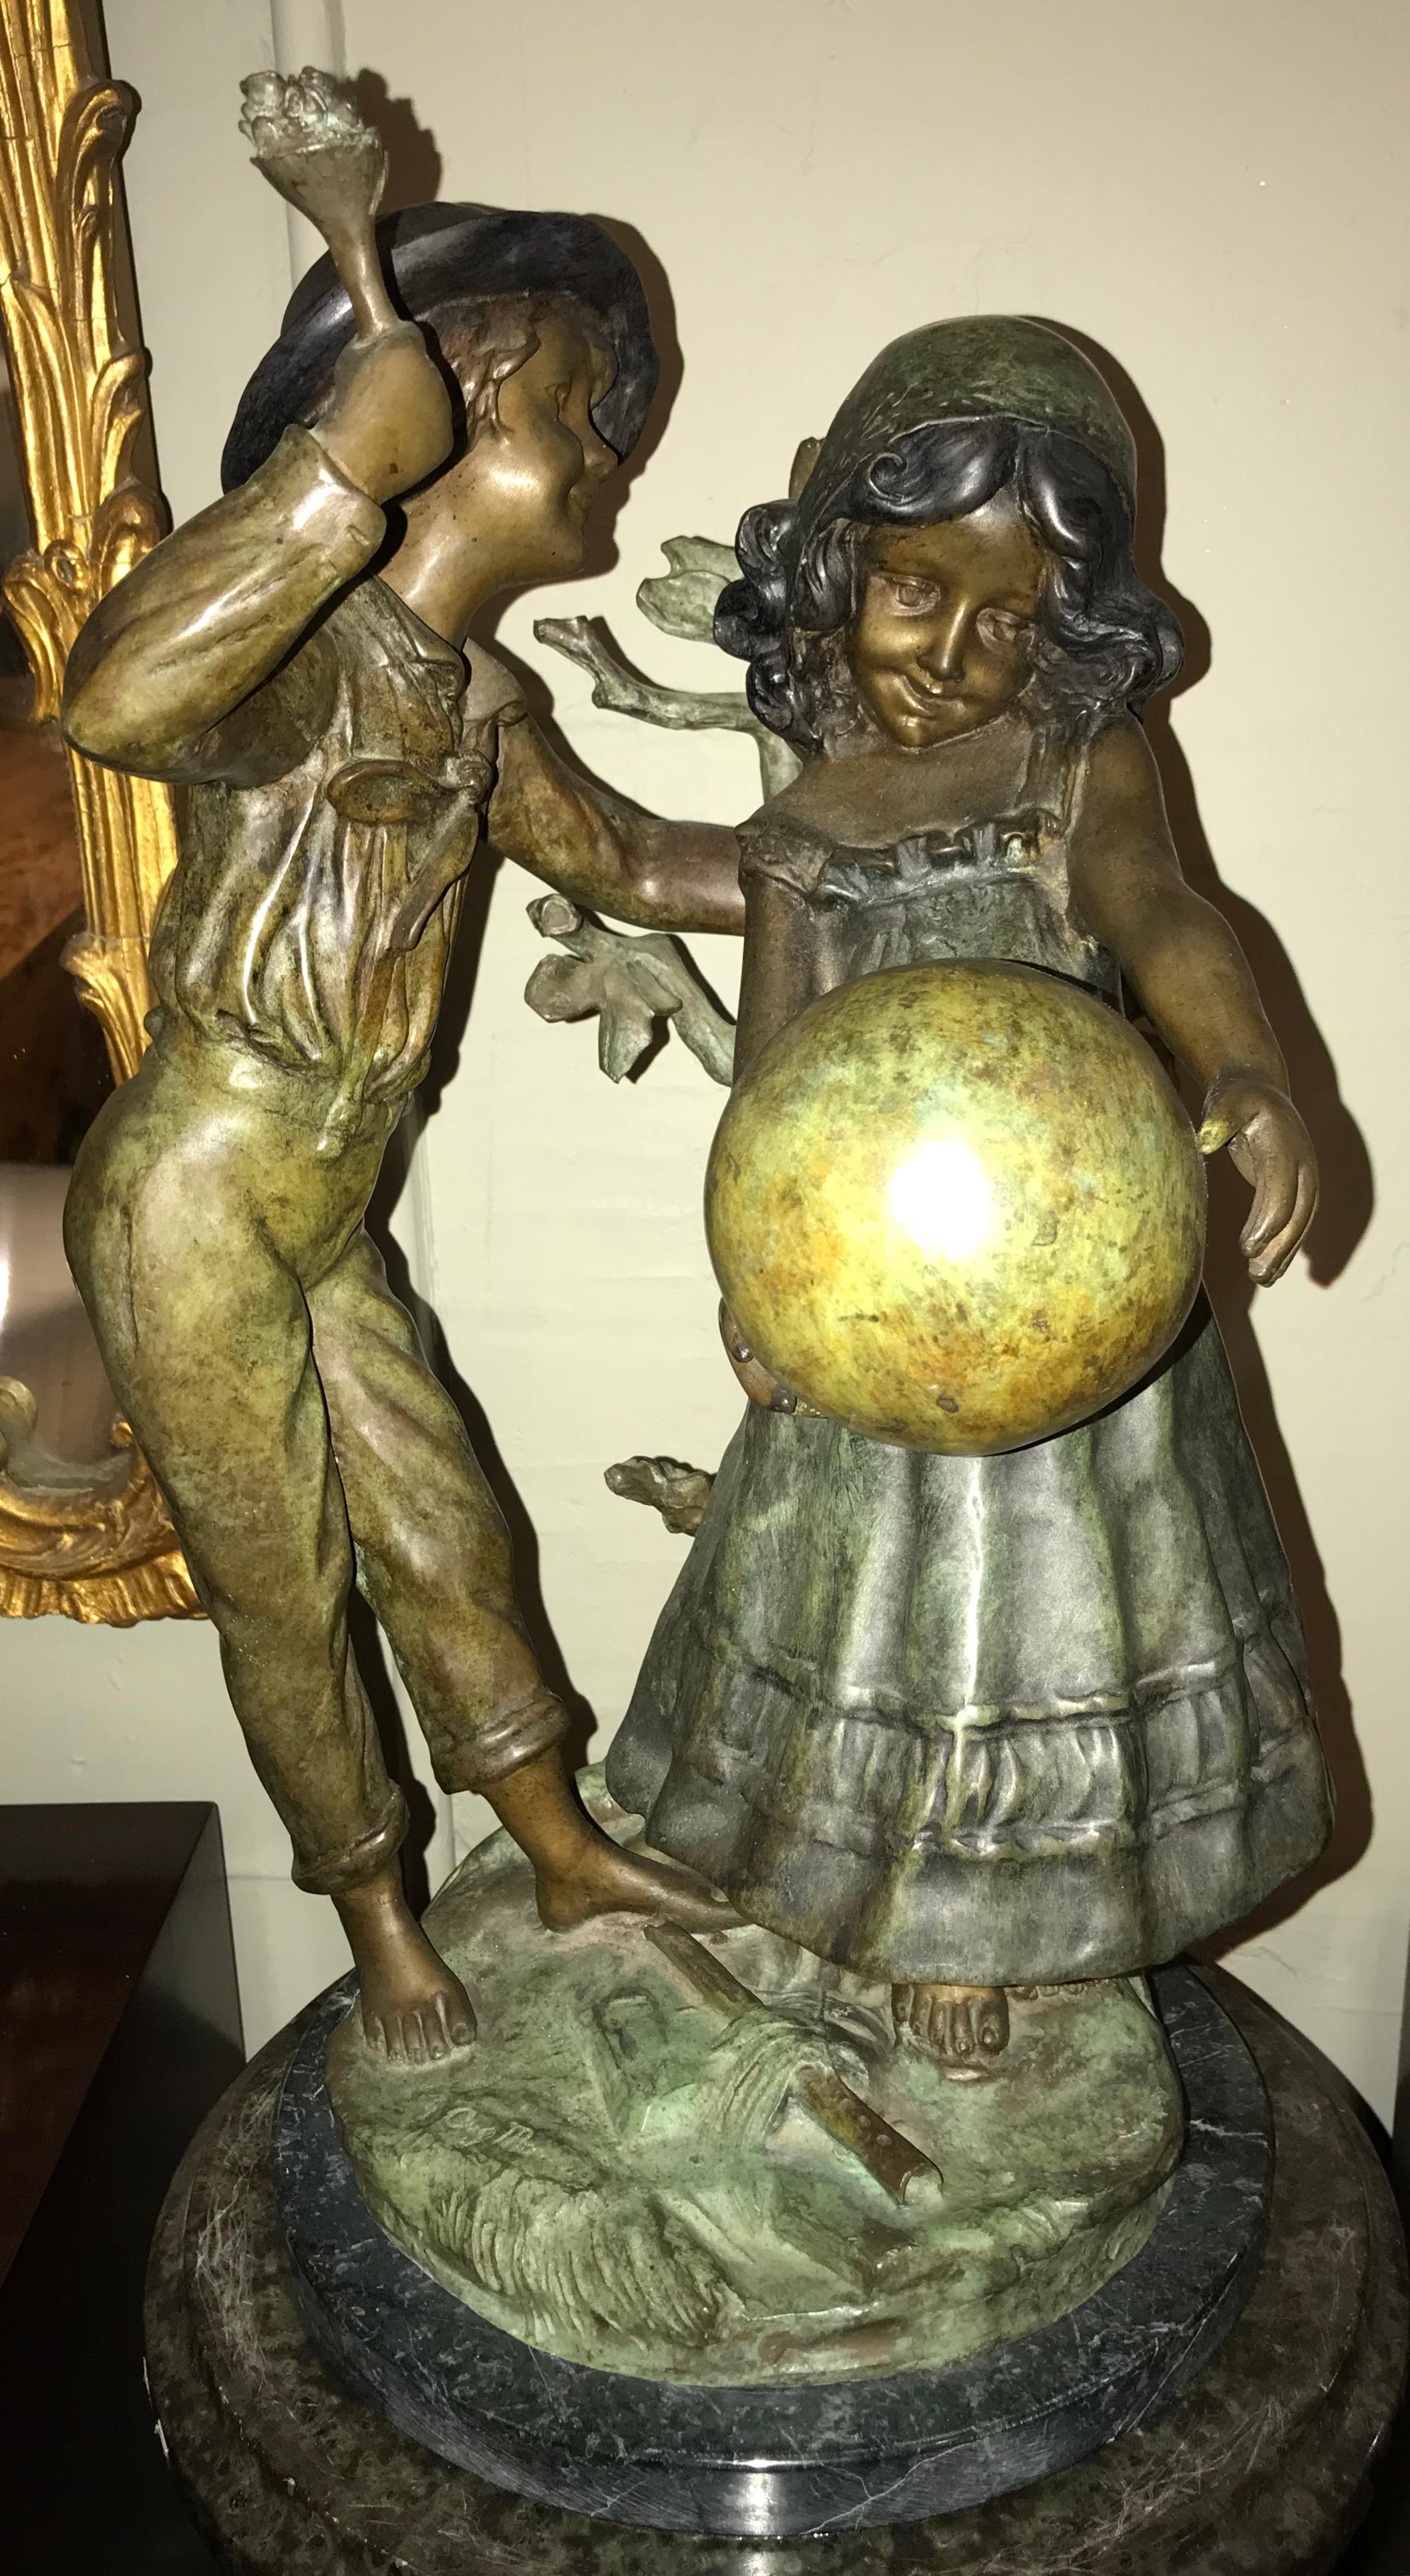 A bronze statue of a boy and girl playing with a ball signed. This finely cast bronze has a wonderful patina and the subject matter is simply breathtaking. This fine piece after August Moreau shows a brother and sister playfully enjoying their time